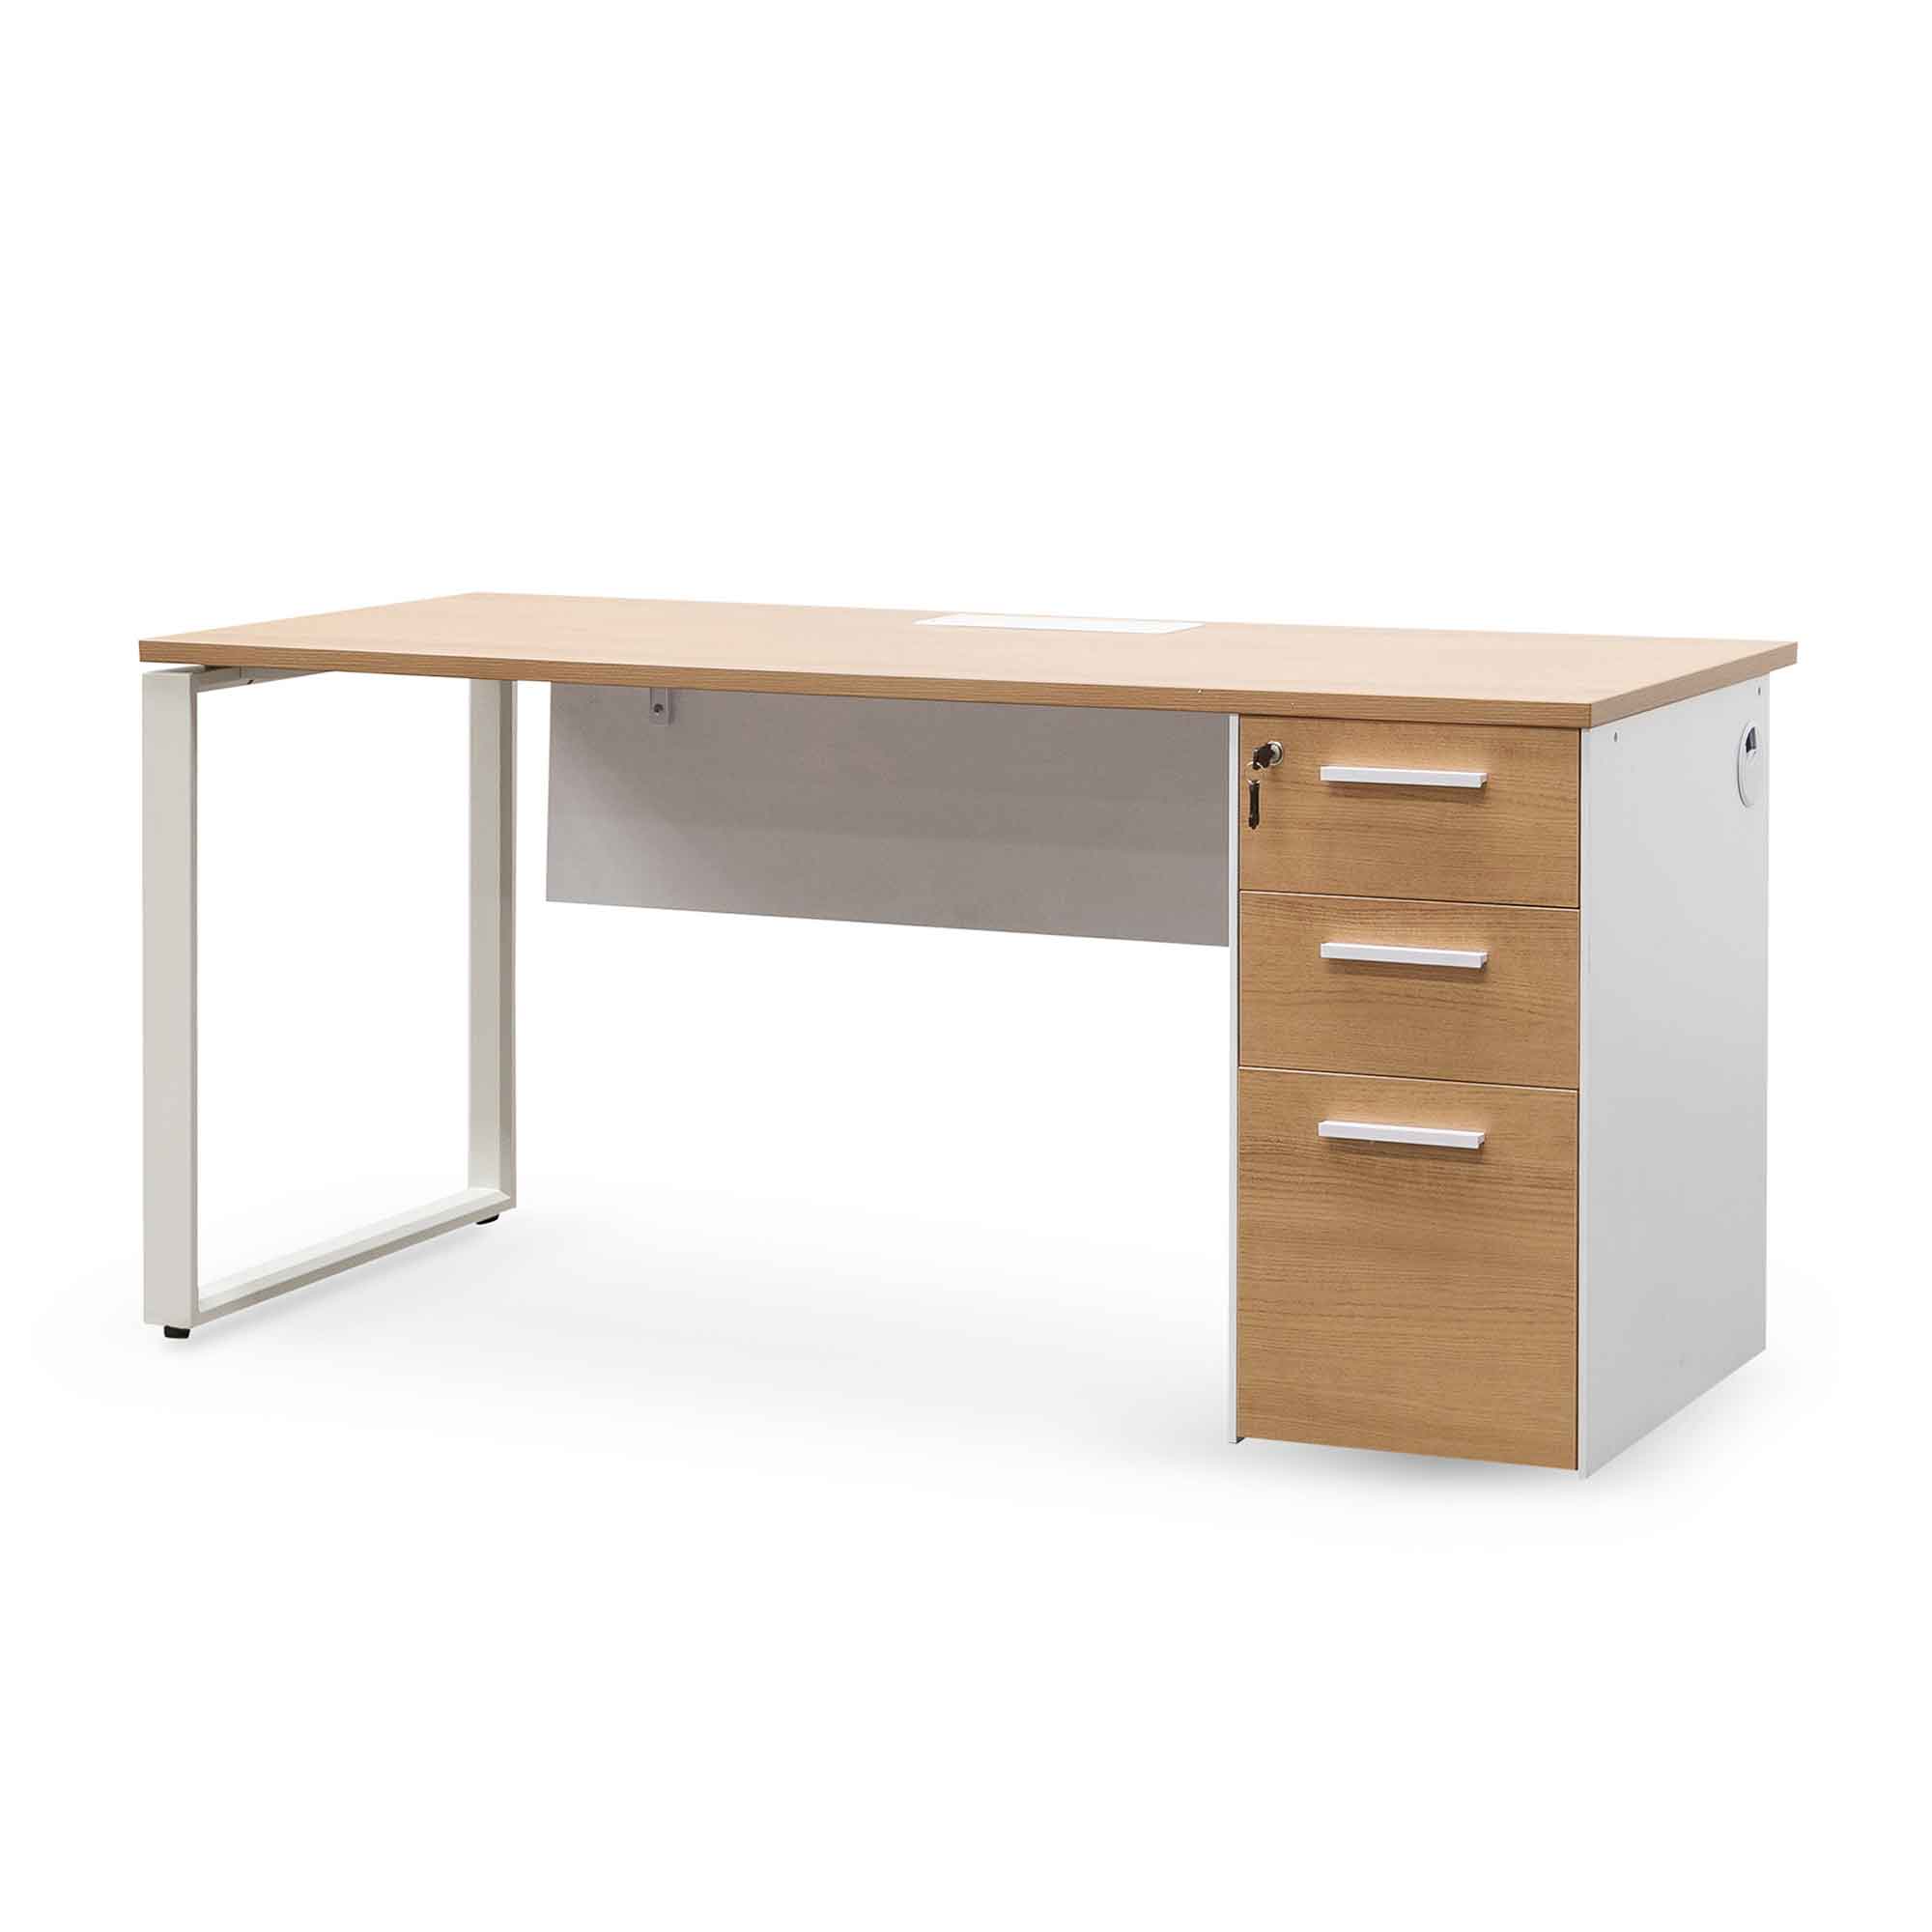 Sofia 1 Seater Office Desk - Natural and White